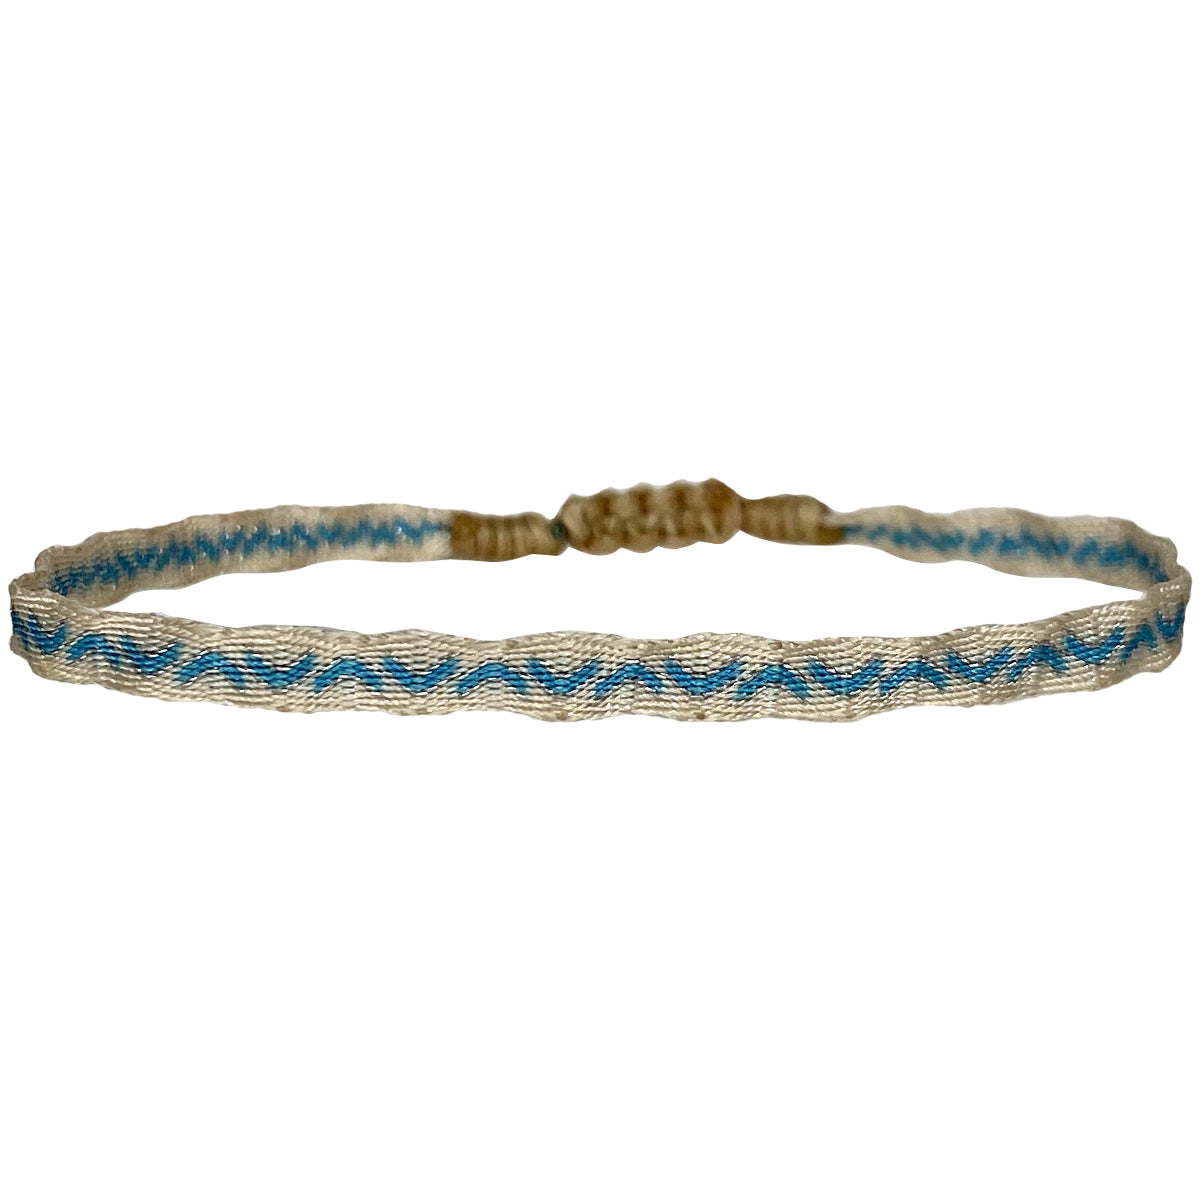 BASIC HANDWOVEN BRACELET IN CREAM AND TURQUOISE